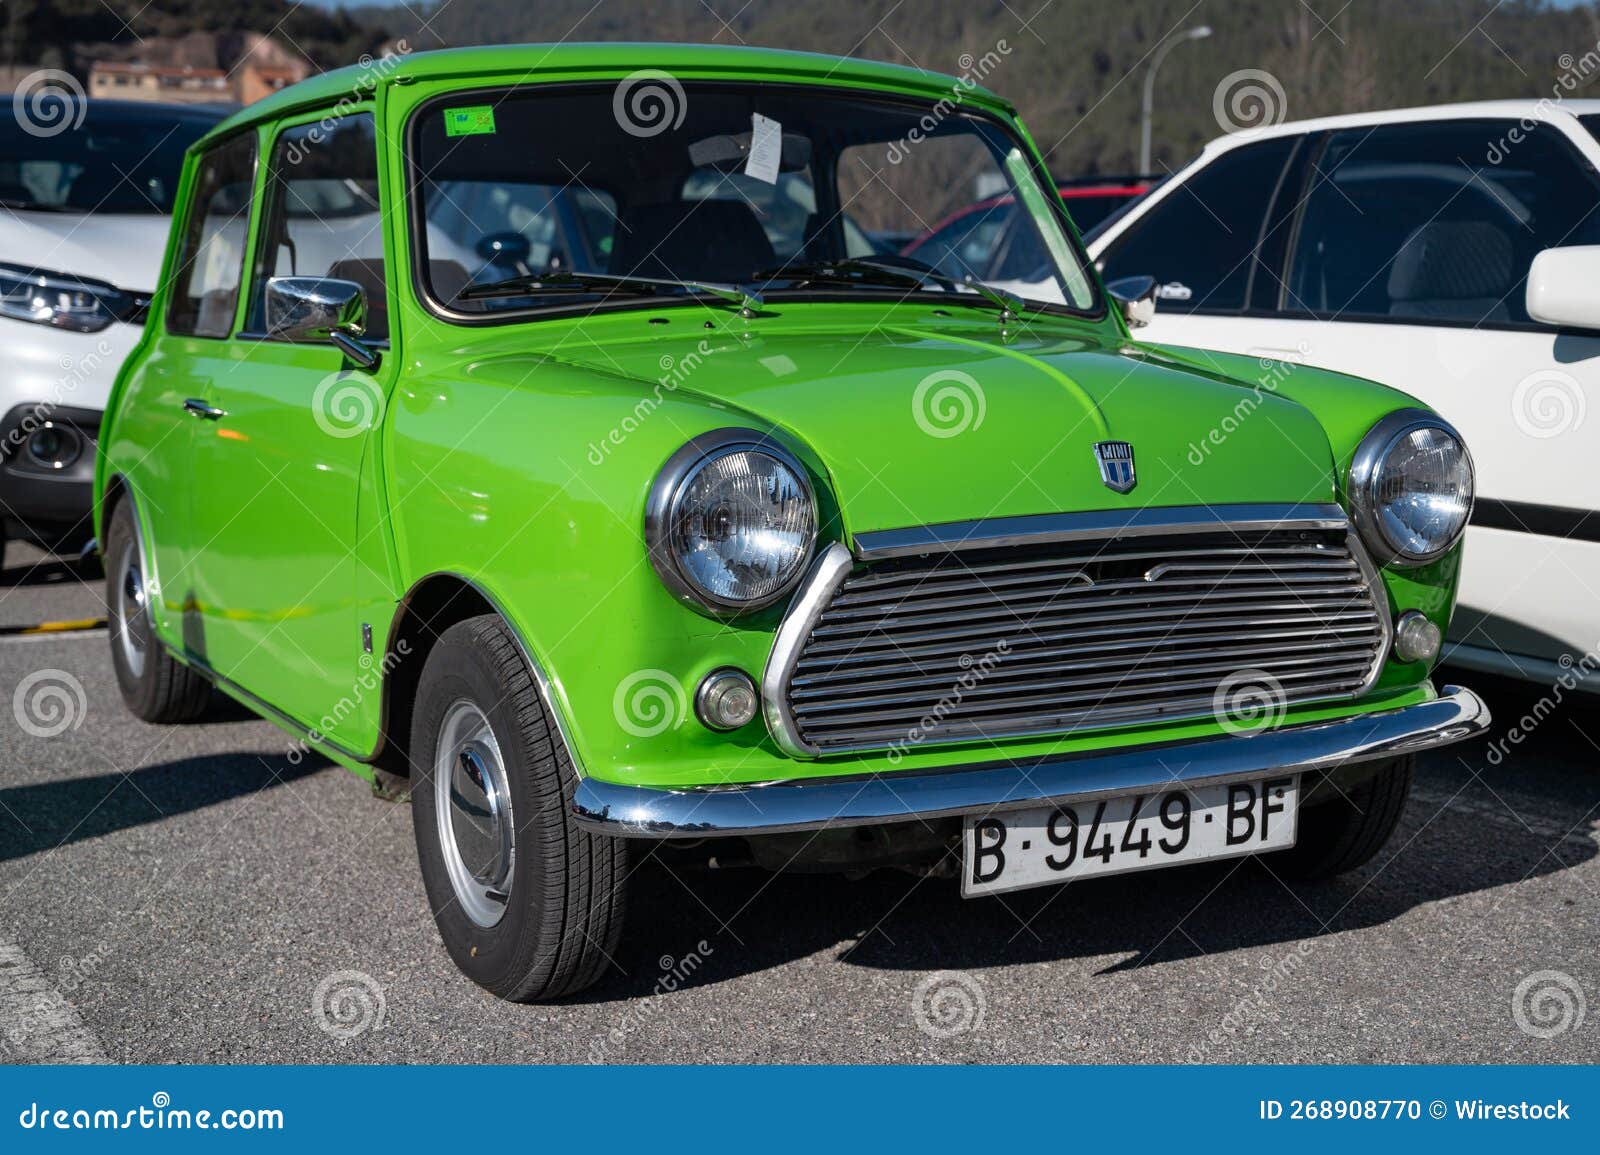 Classic Mini of Green Color Parked in Street Editorial Image - Image of ...